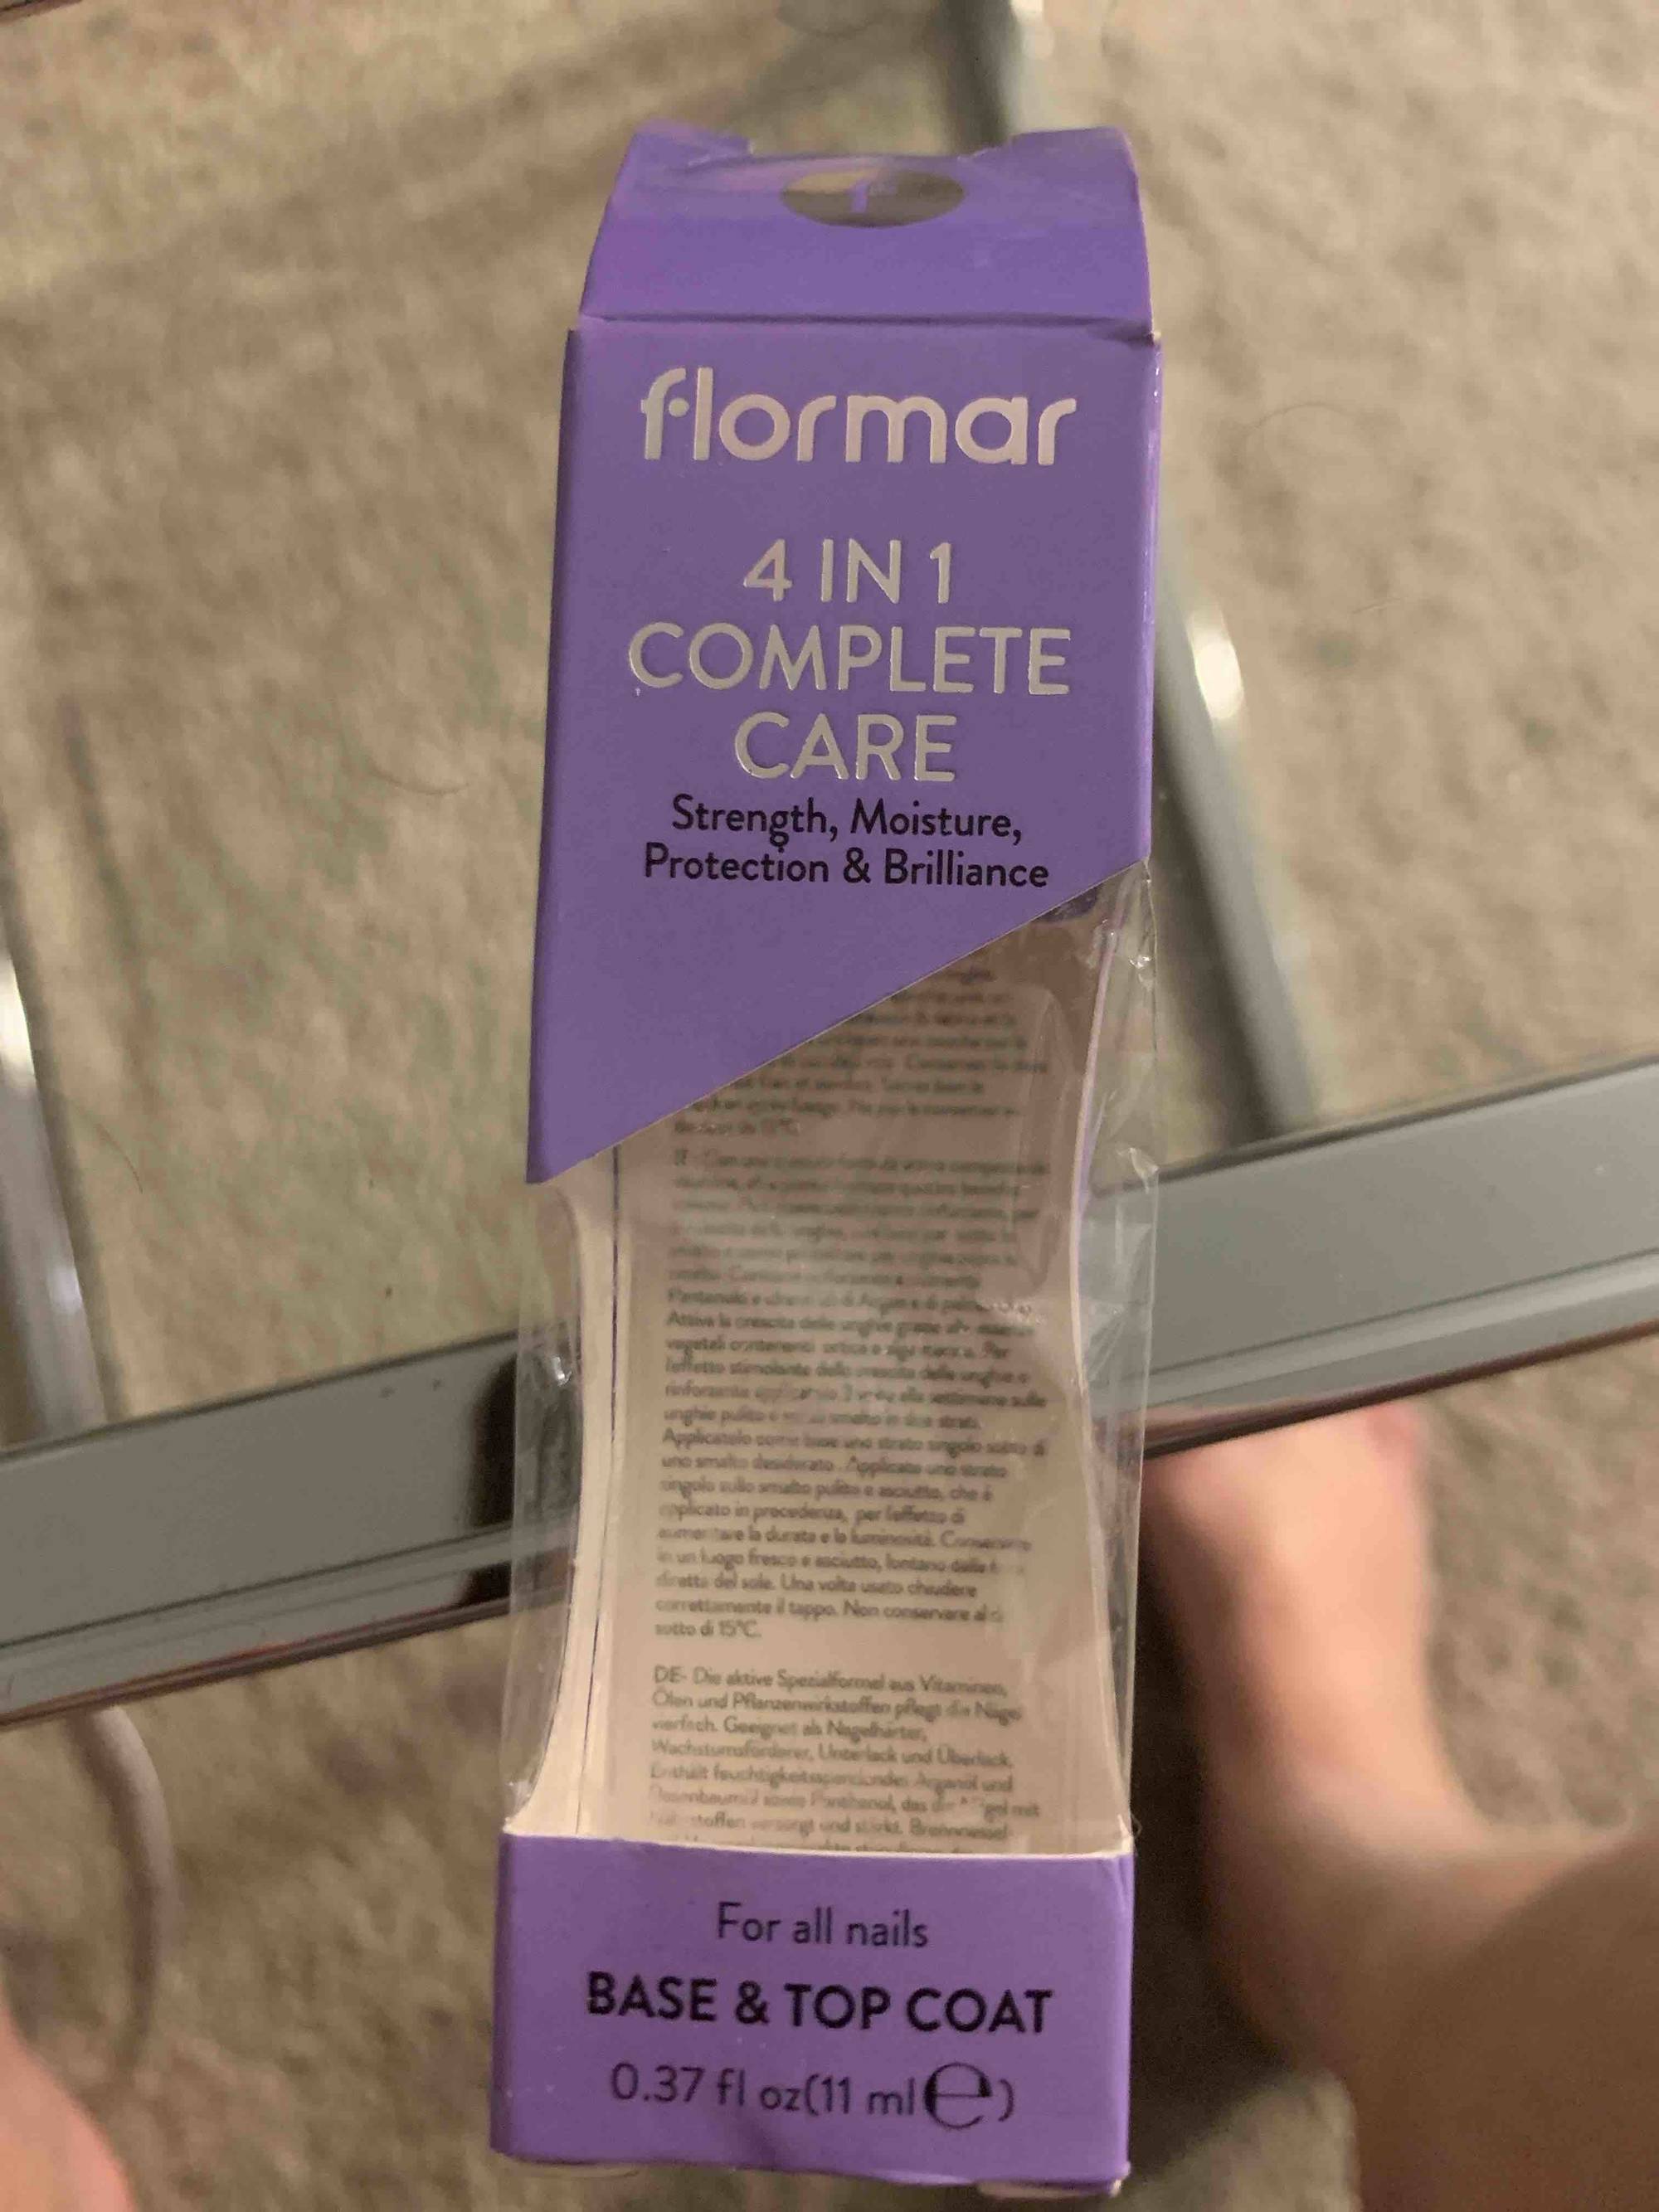 FLORMAR - 4 in 1 complete care - Base & top coat